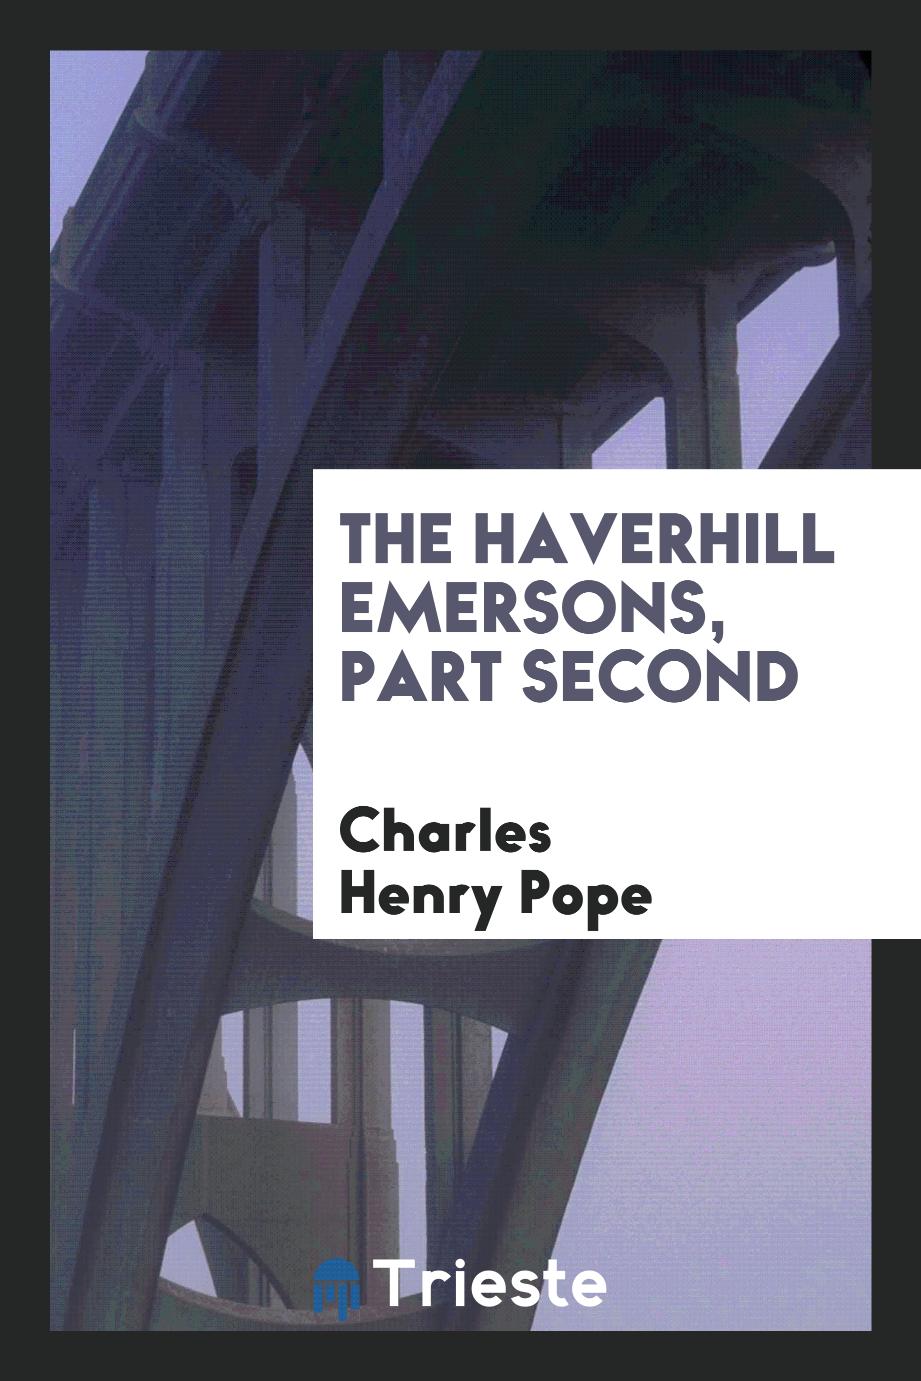 The Haverhill Emersons, Part second